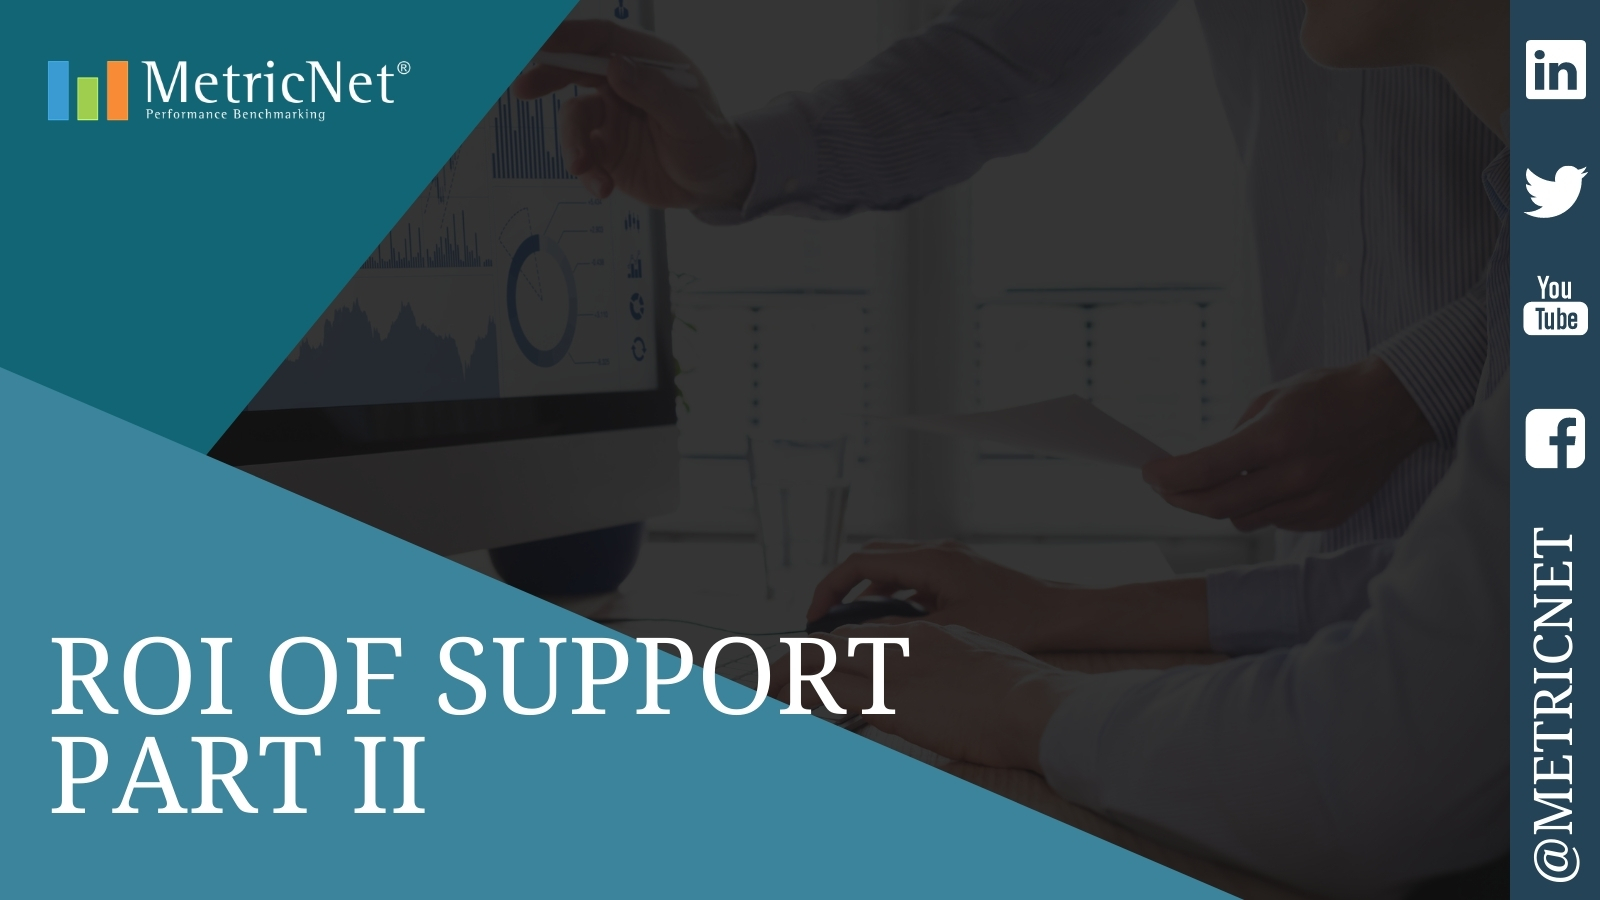 ROI OF SUPPORT PART II